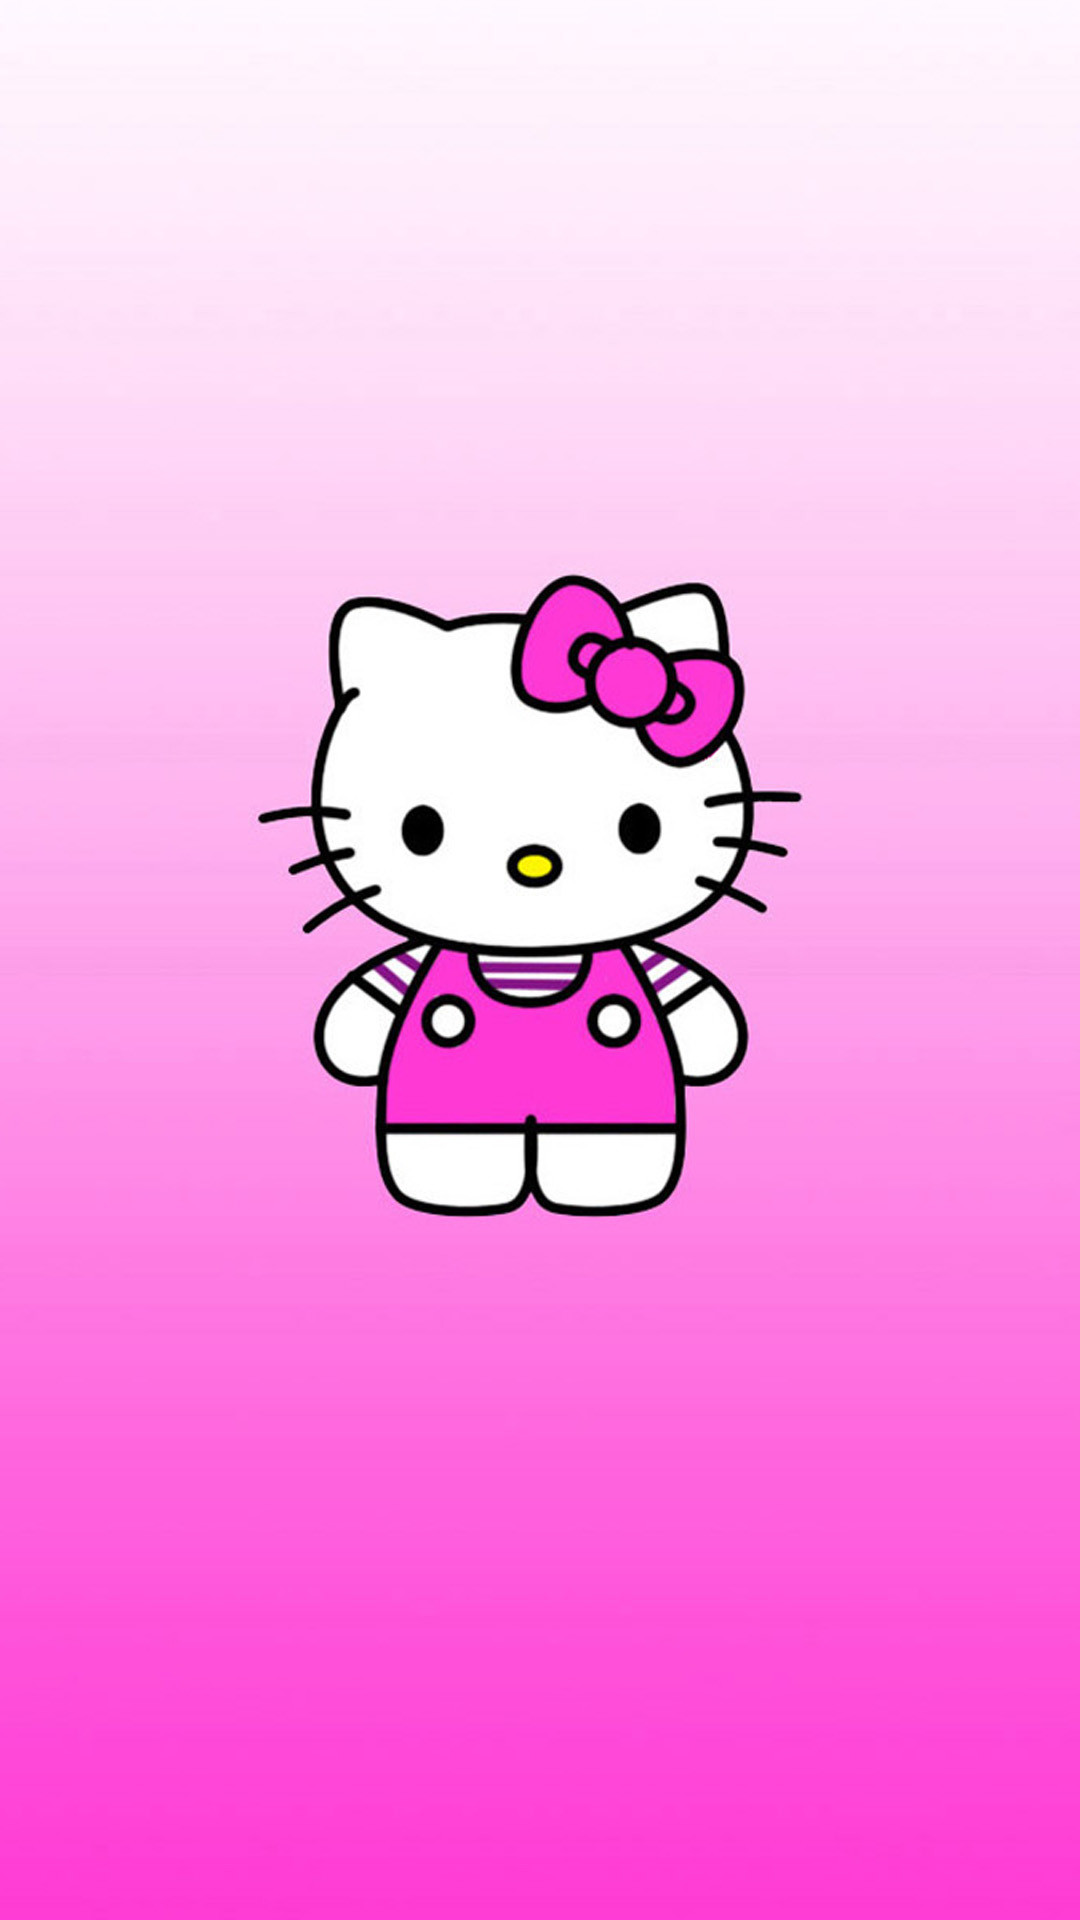 1080x1920 File attachment for Apple iPhone 6 Plus HD Wallpaper - Hello Kitty Images